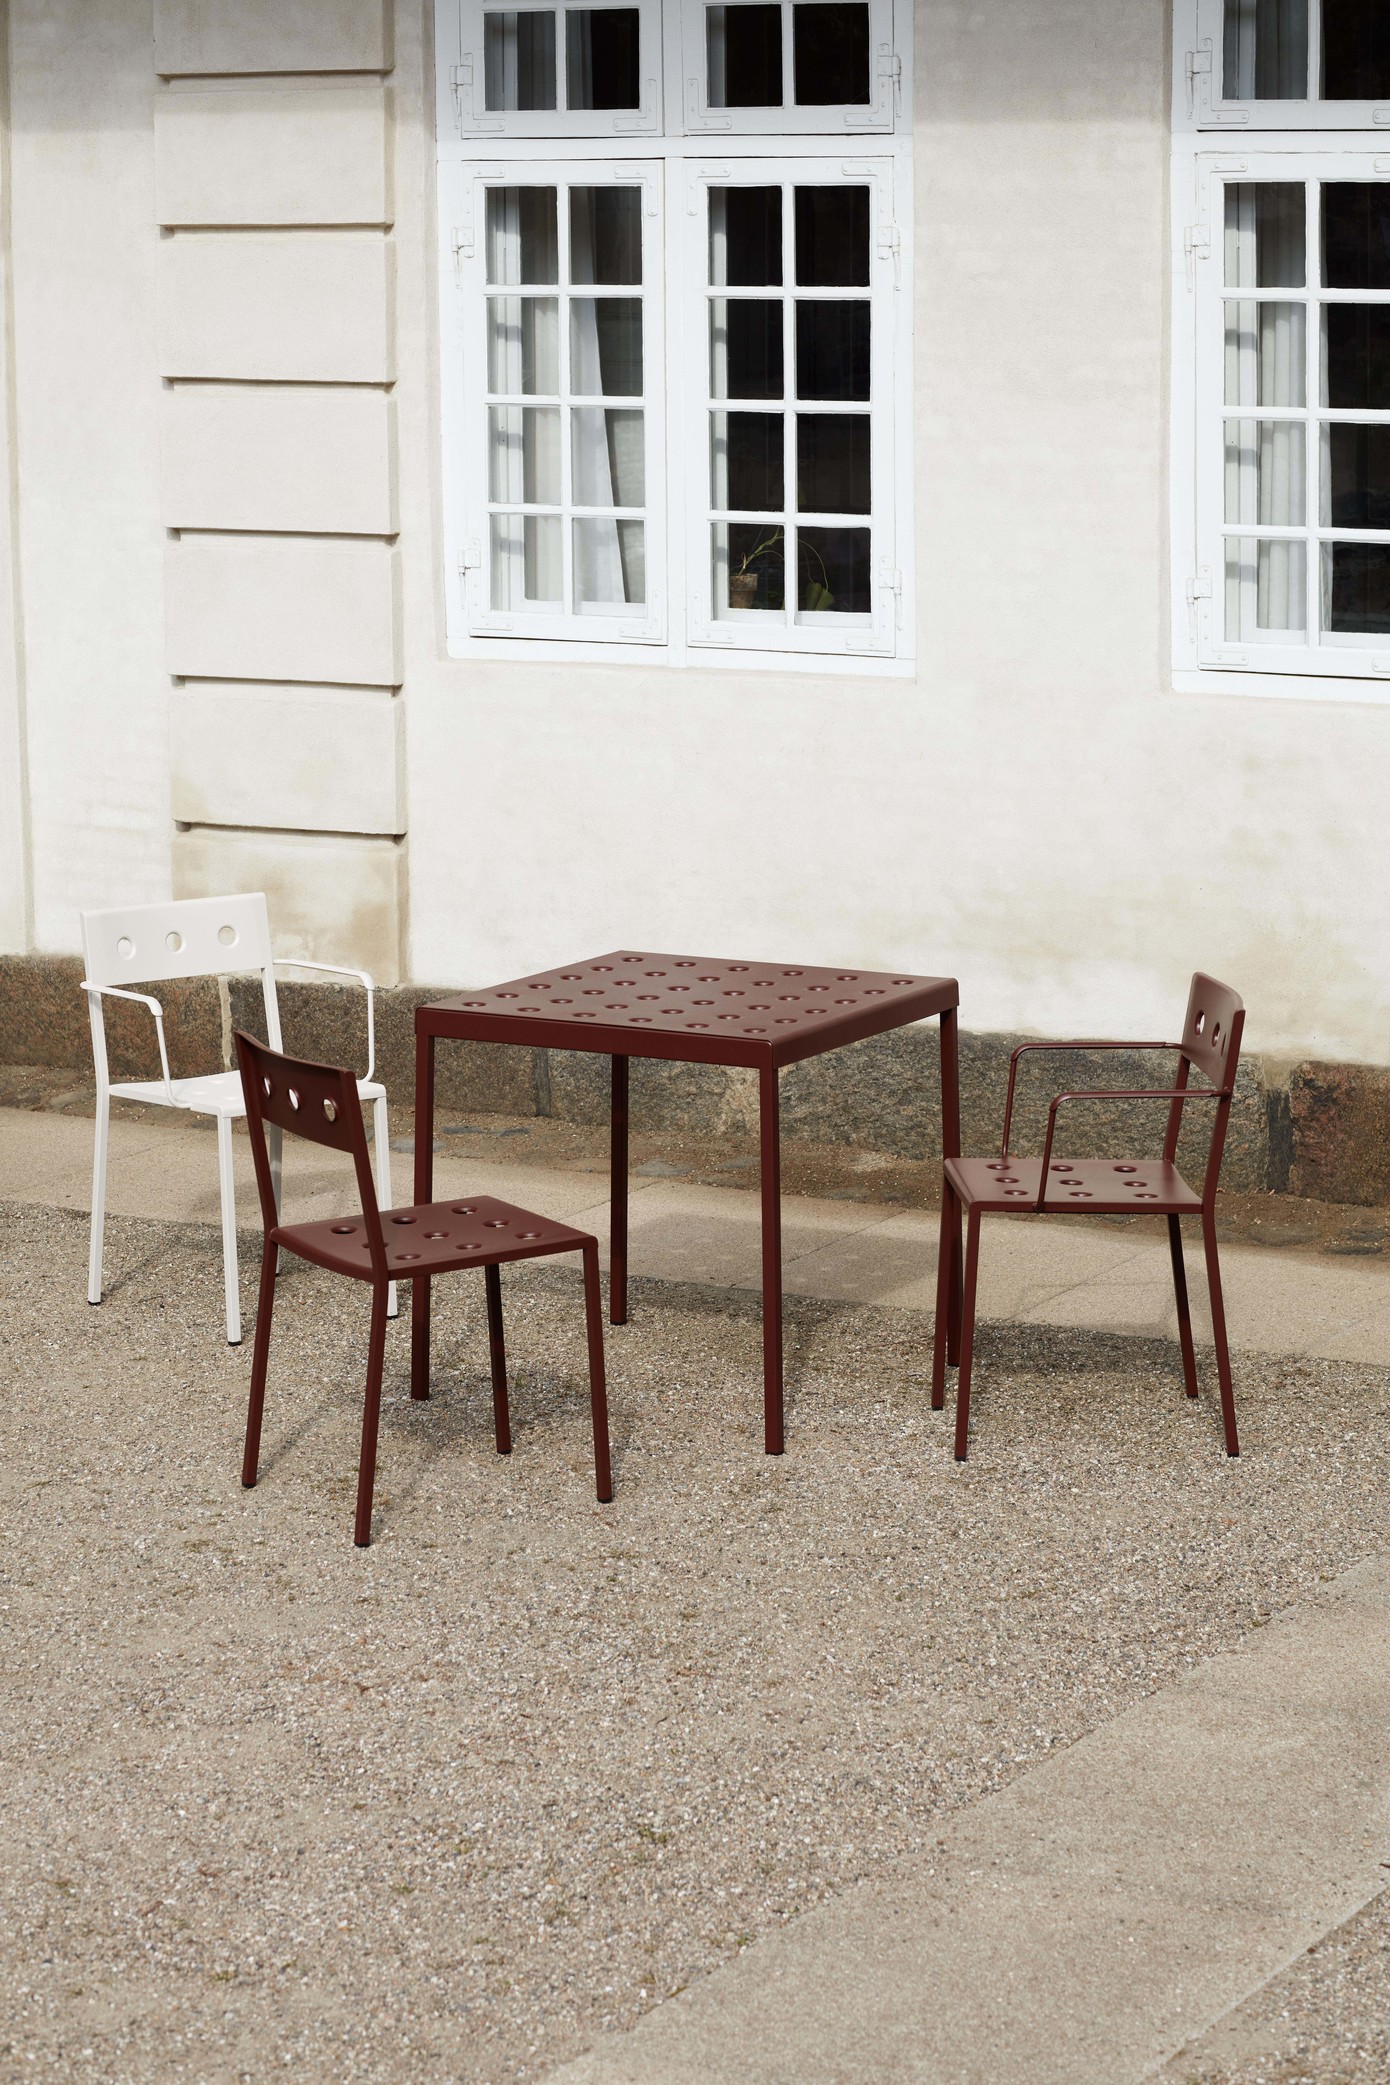 Balcony Dining Table L75cm plus 2 chairs and cushions special